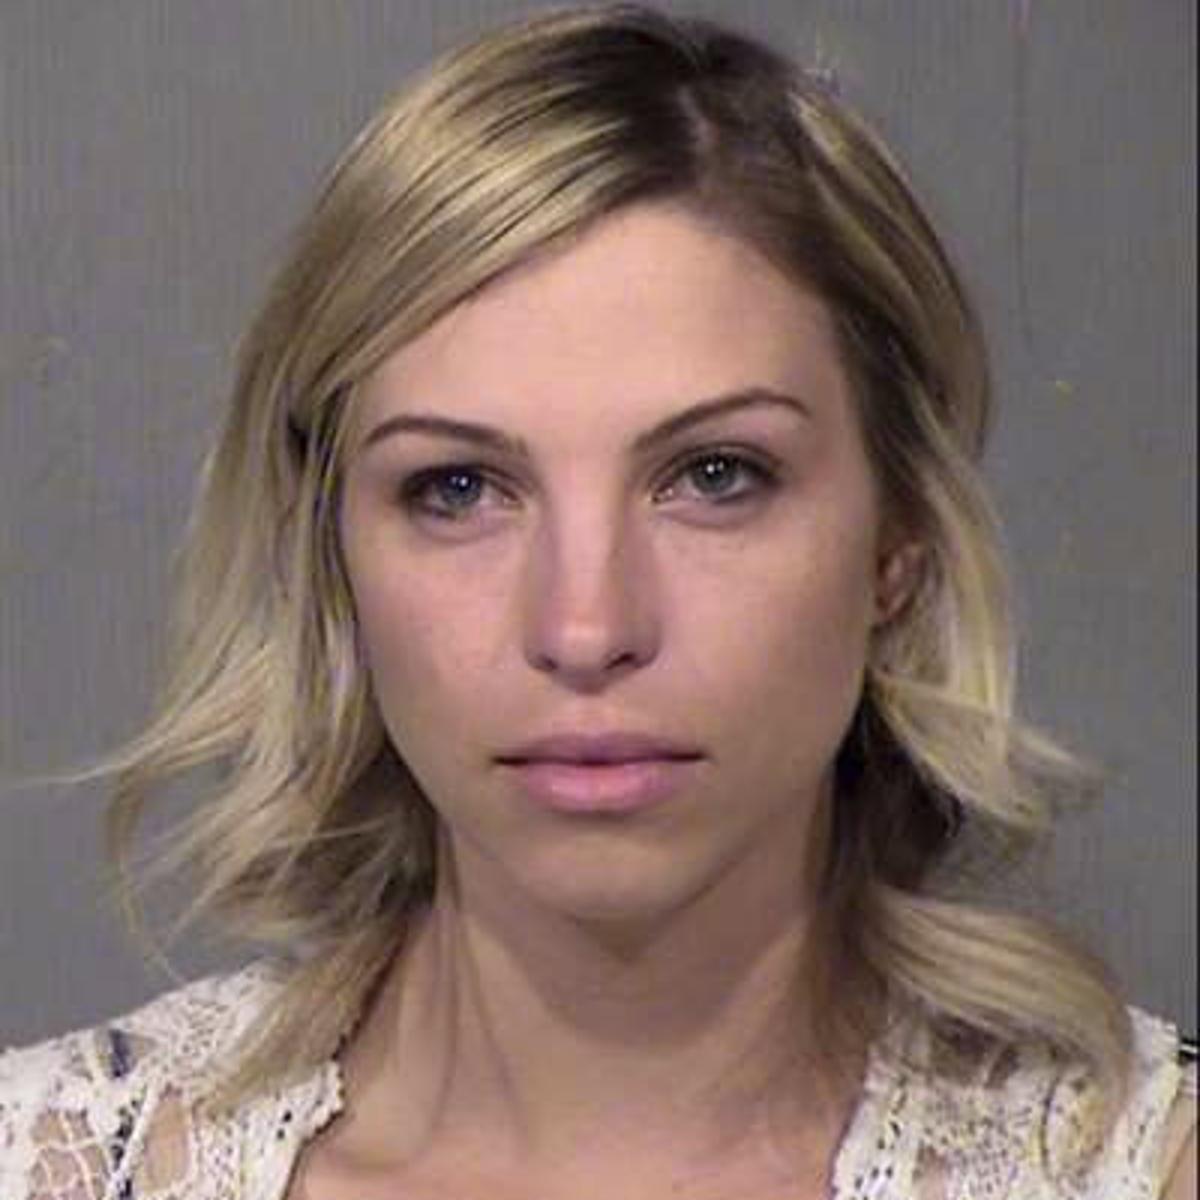 Ex-Arizona elementary teacher gets 20 years for sexual abuse of boy, 13